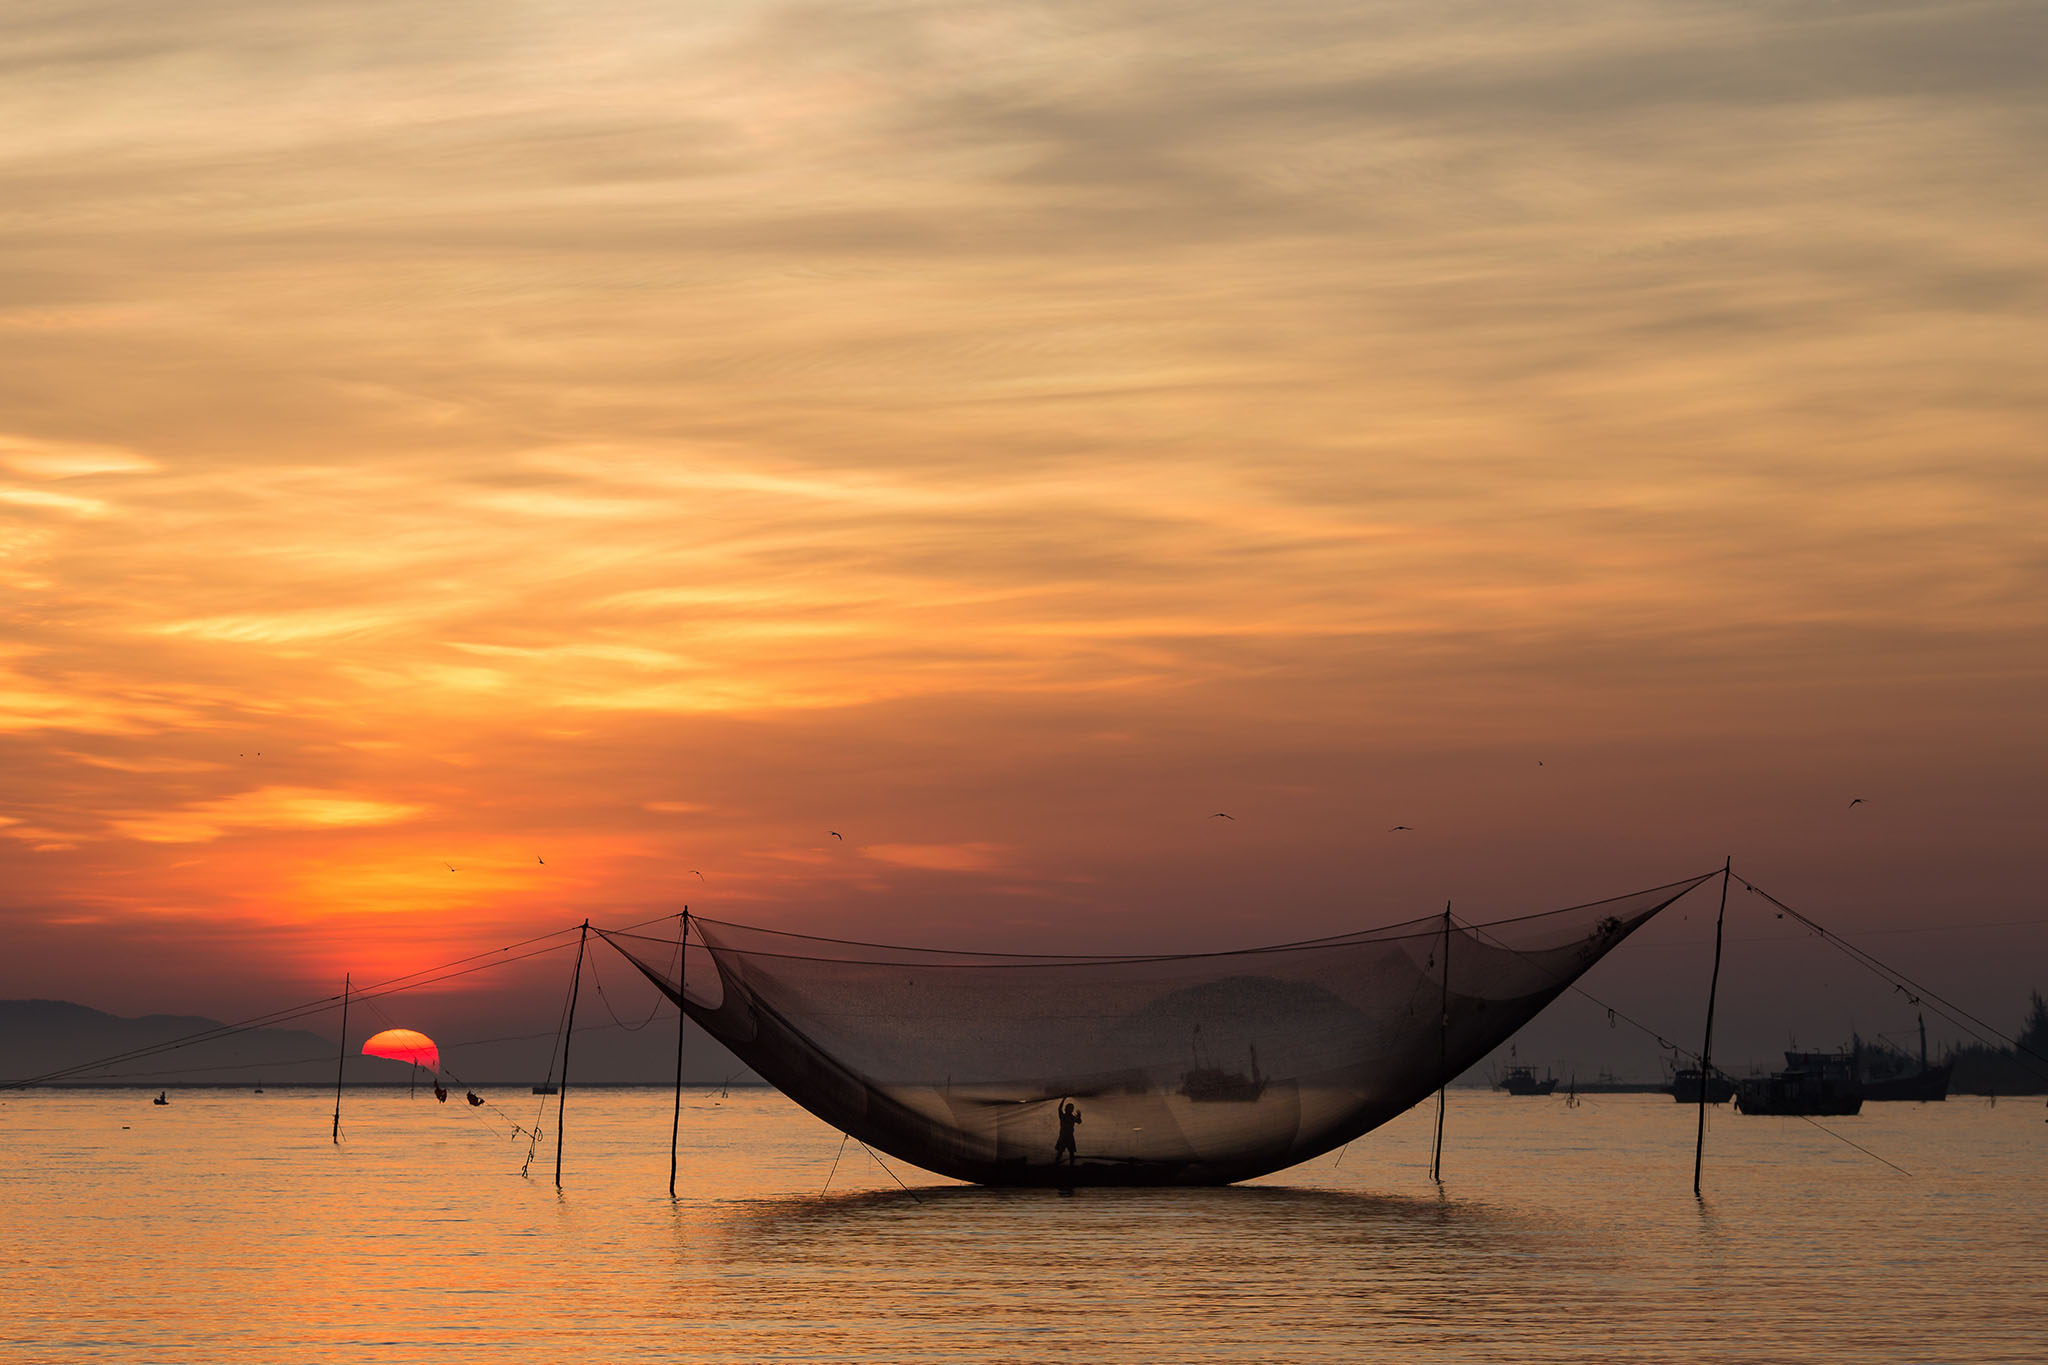 Fisherman dropping the fish from his square fishing net at the sunrise.